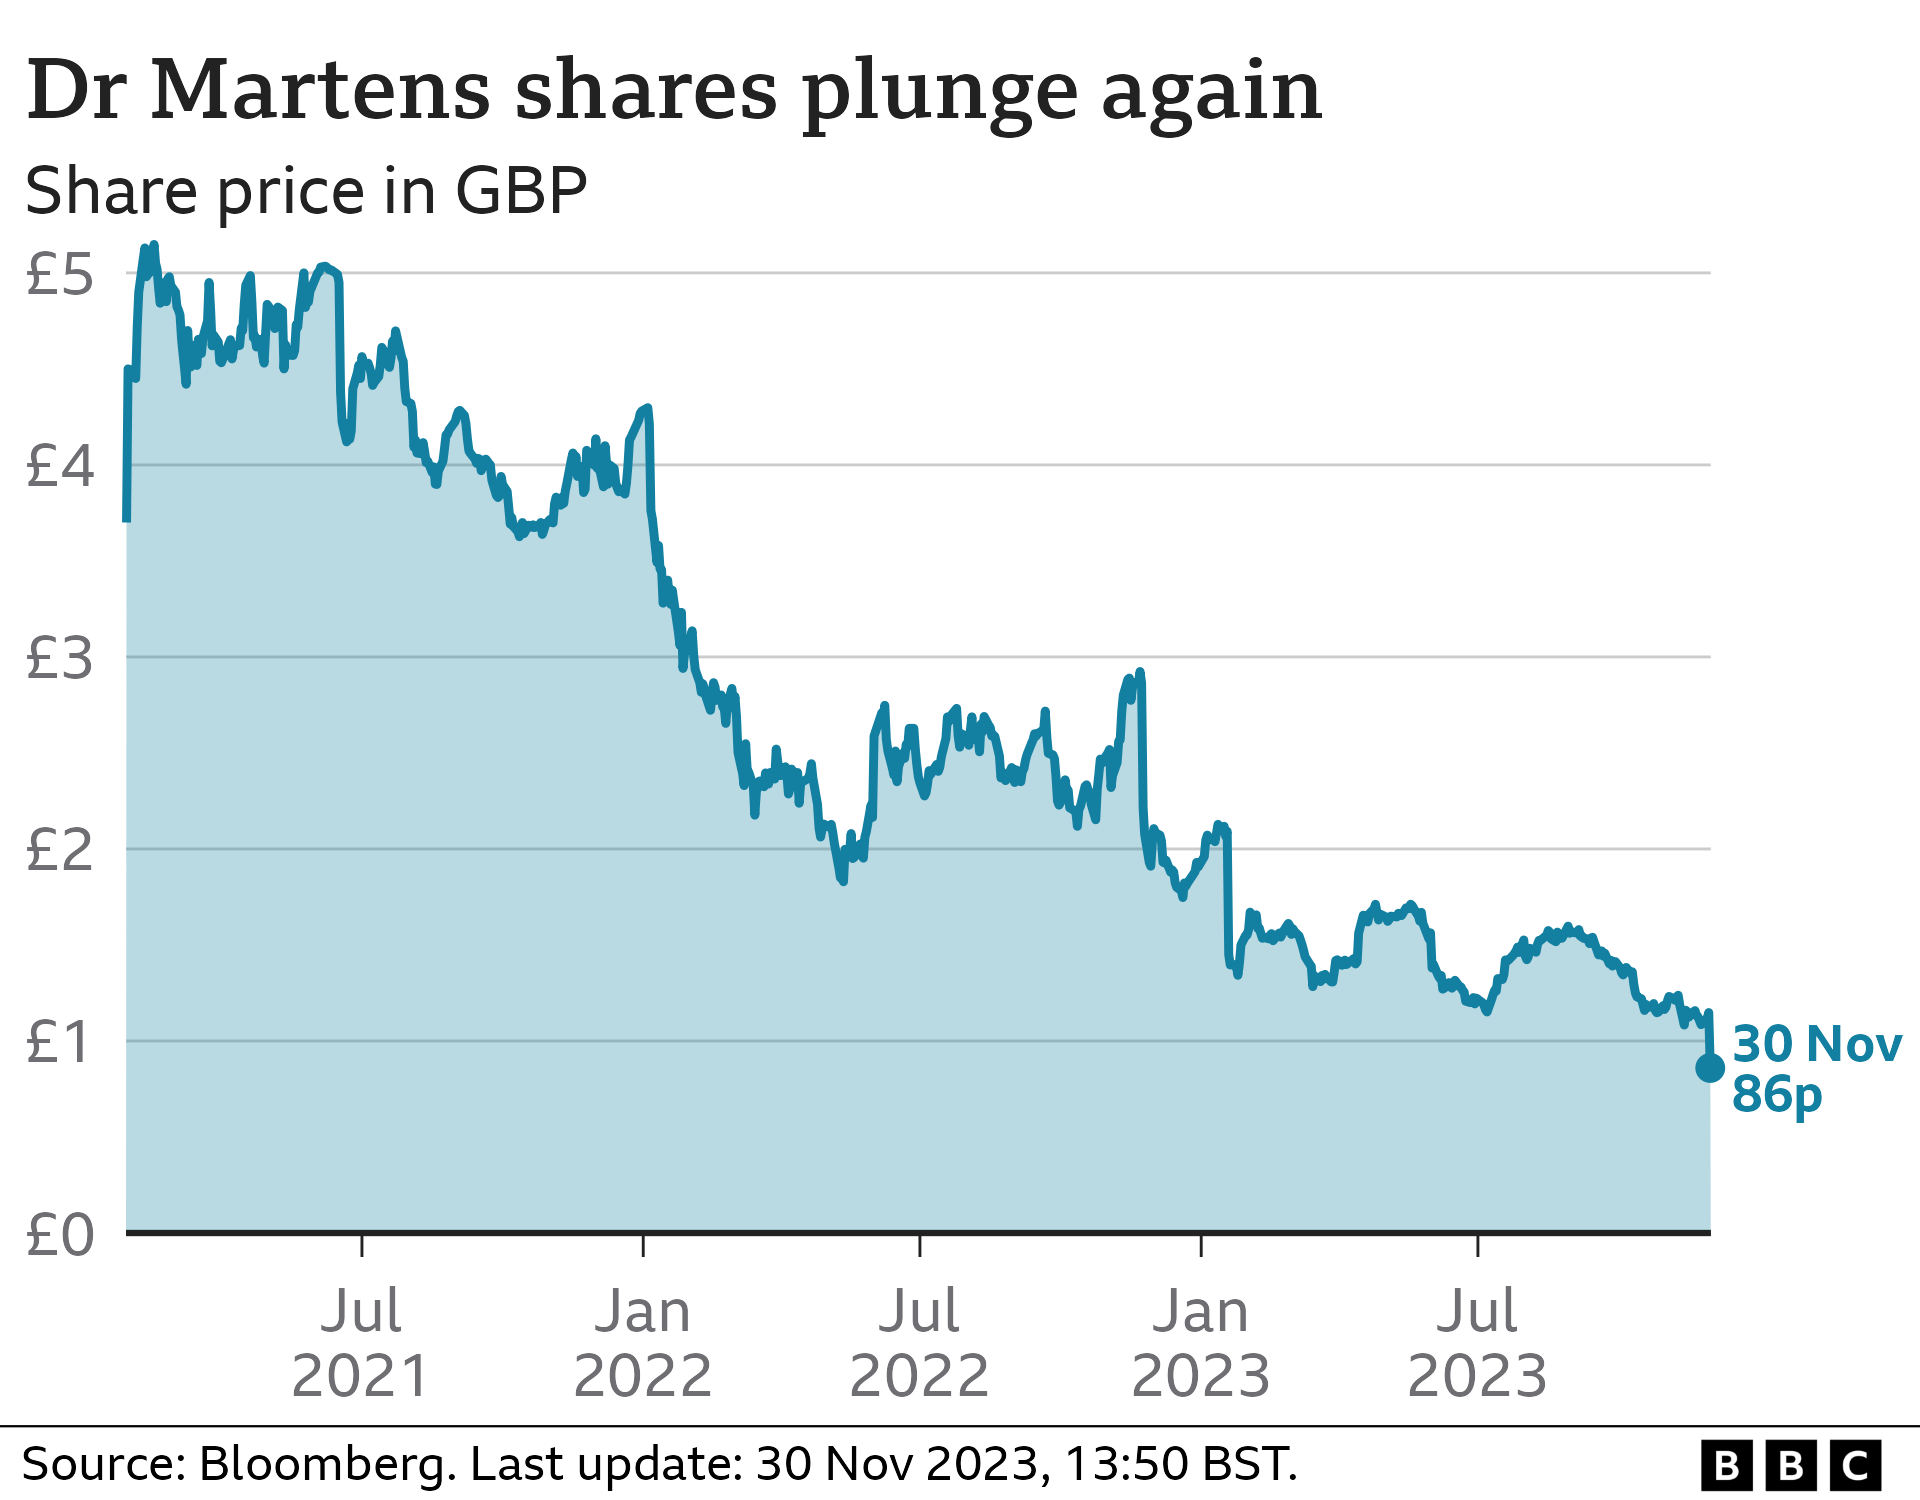 Line chart showing the price of Dr Martens stock, which is now £0.9 per share.